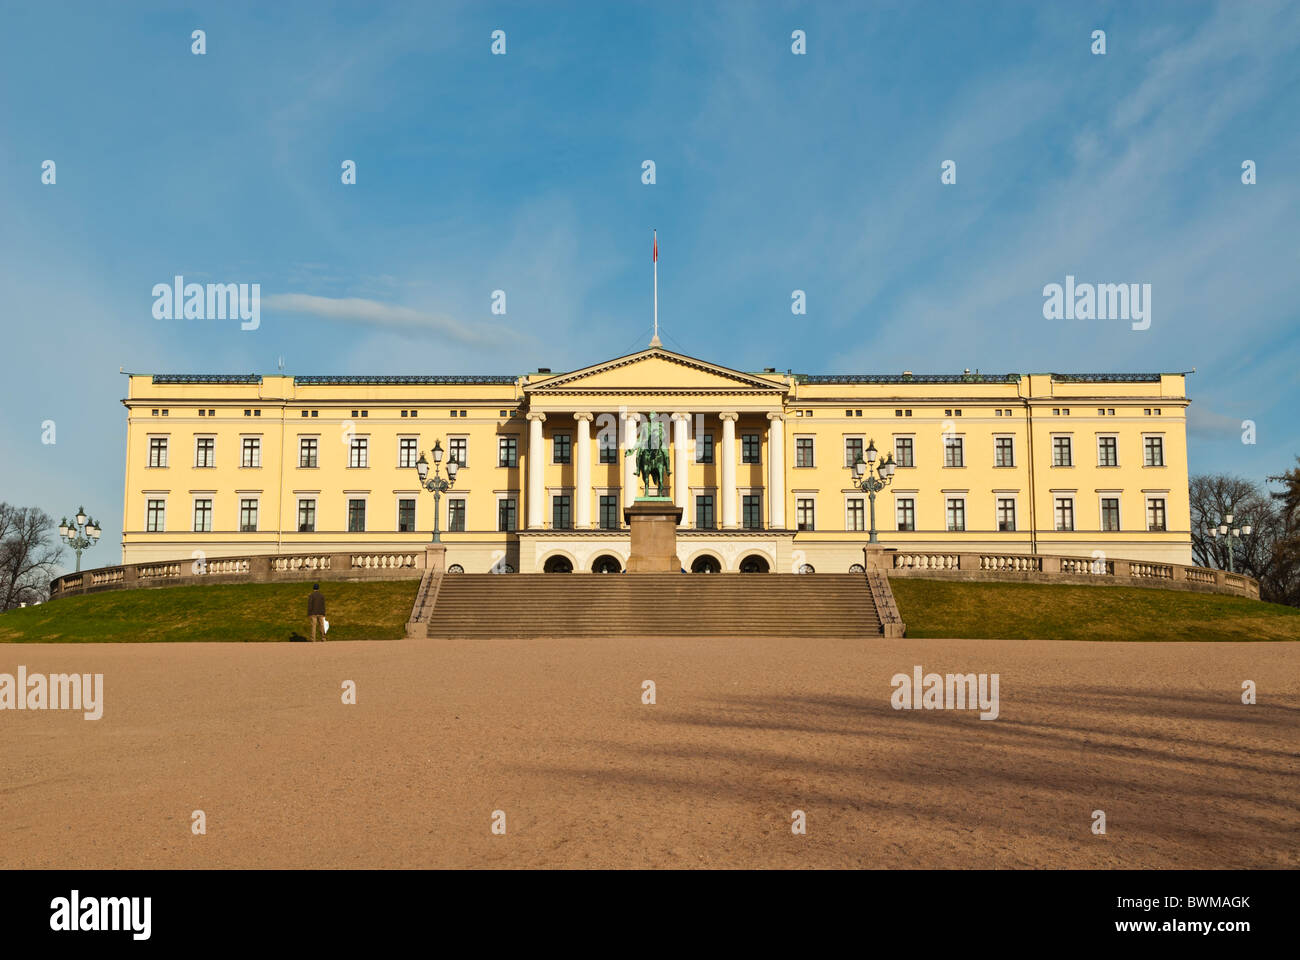 The Royal palace building Oslo Norway Stock Photo